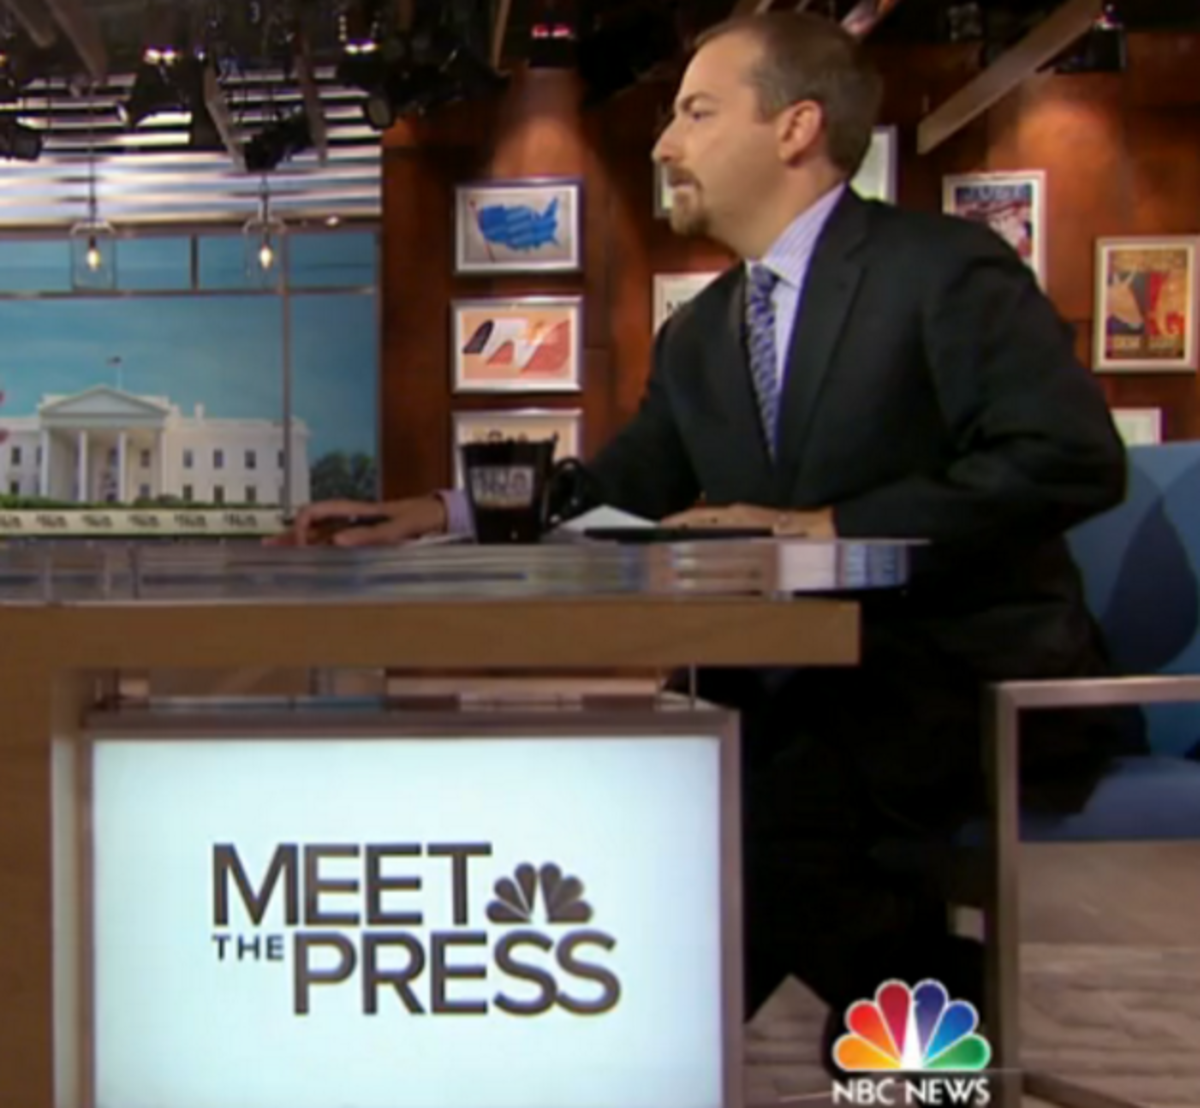 Chuck Todd on the set of meet the press.